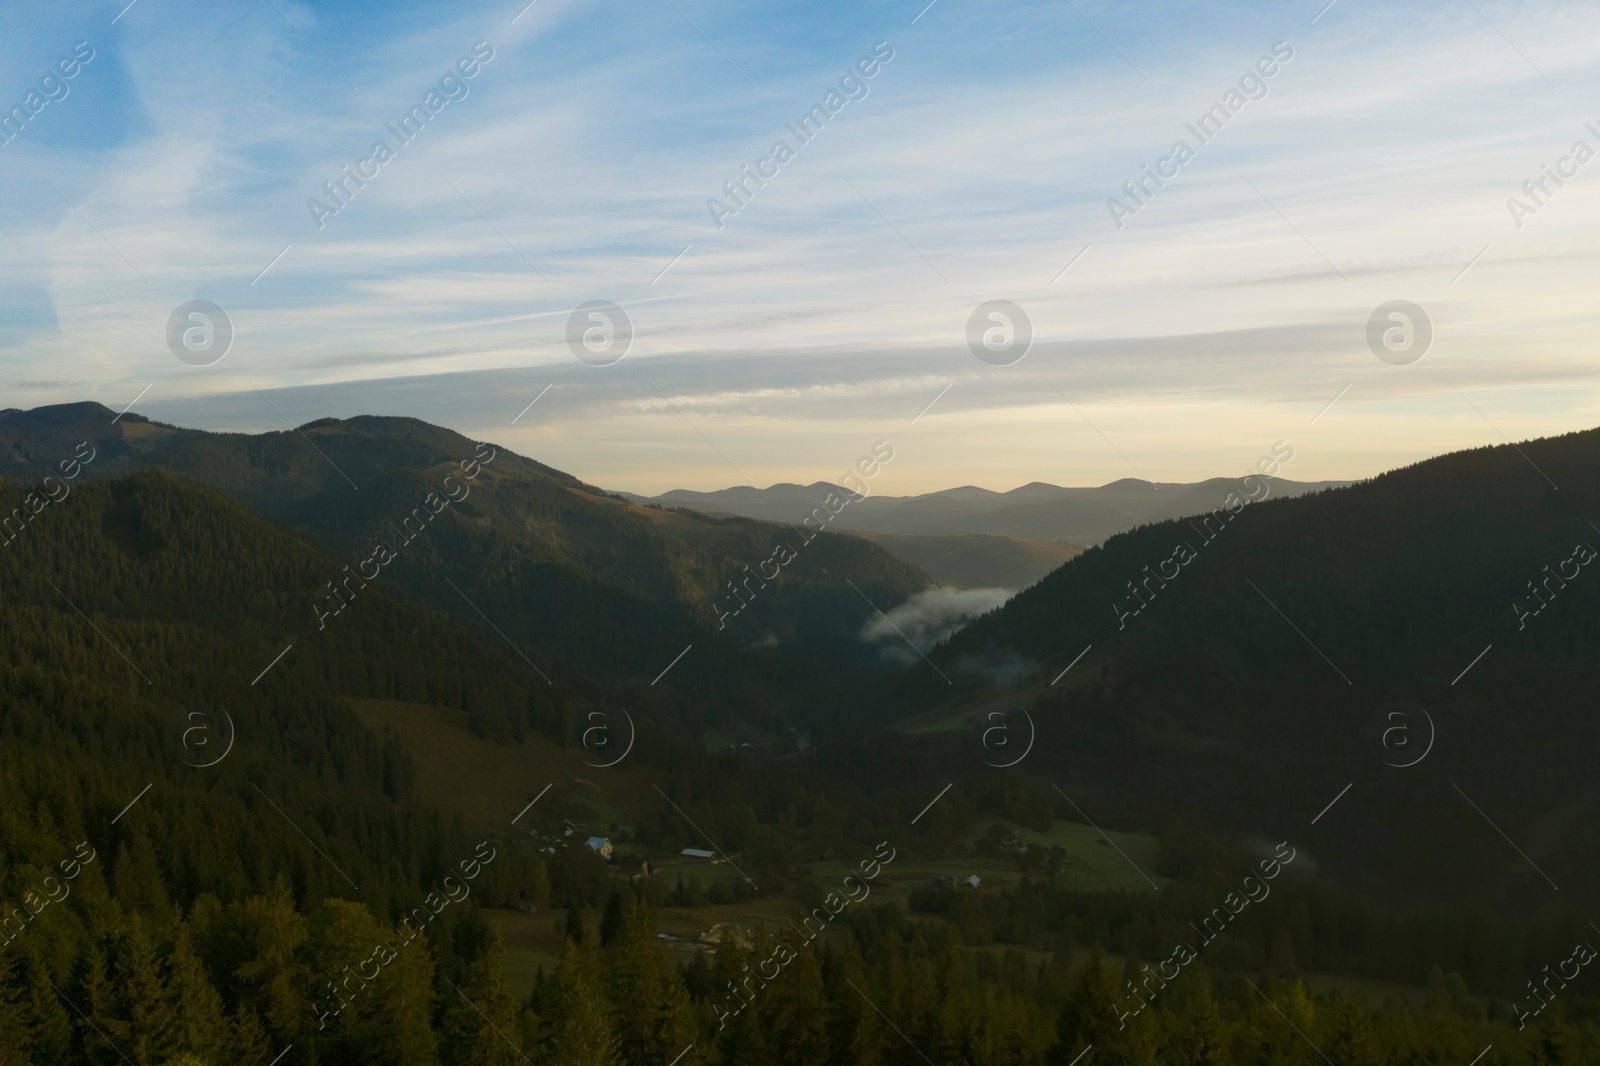 Image of Aerial view of beautiful mountain landscape with village and green trees in morning